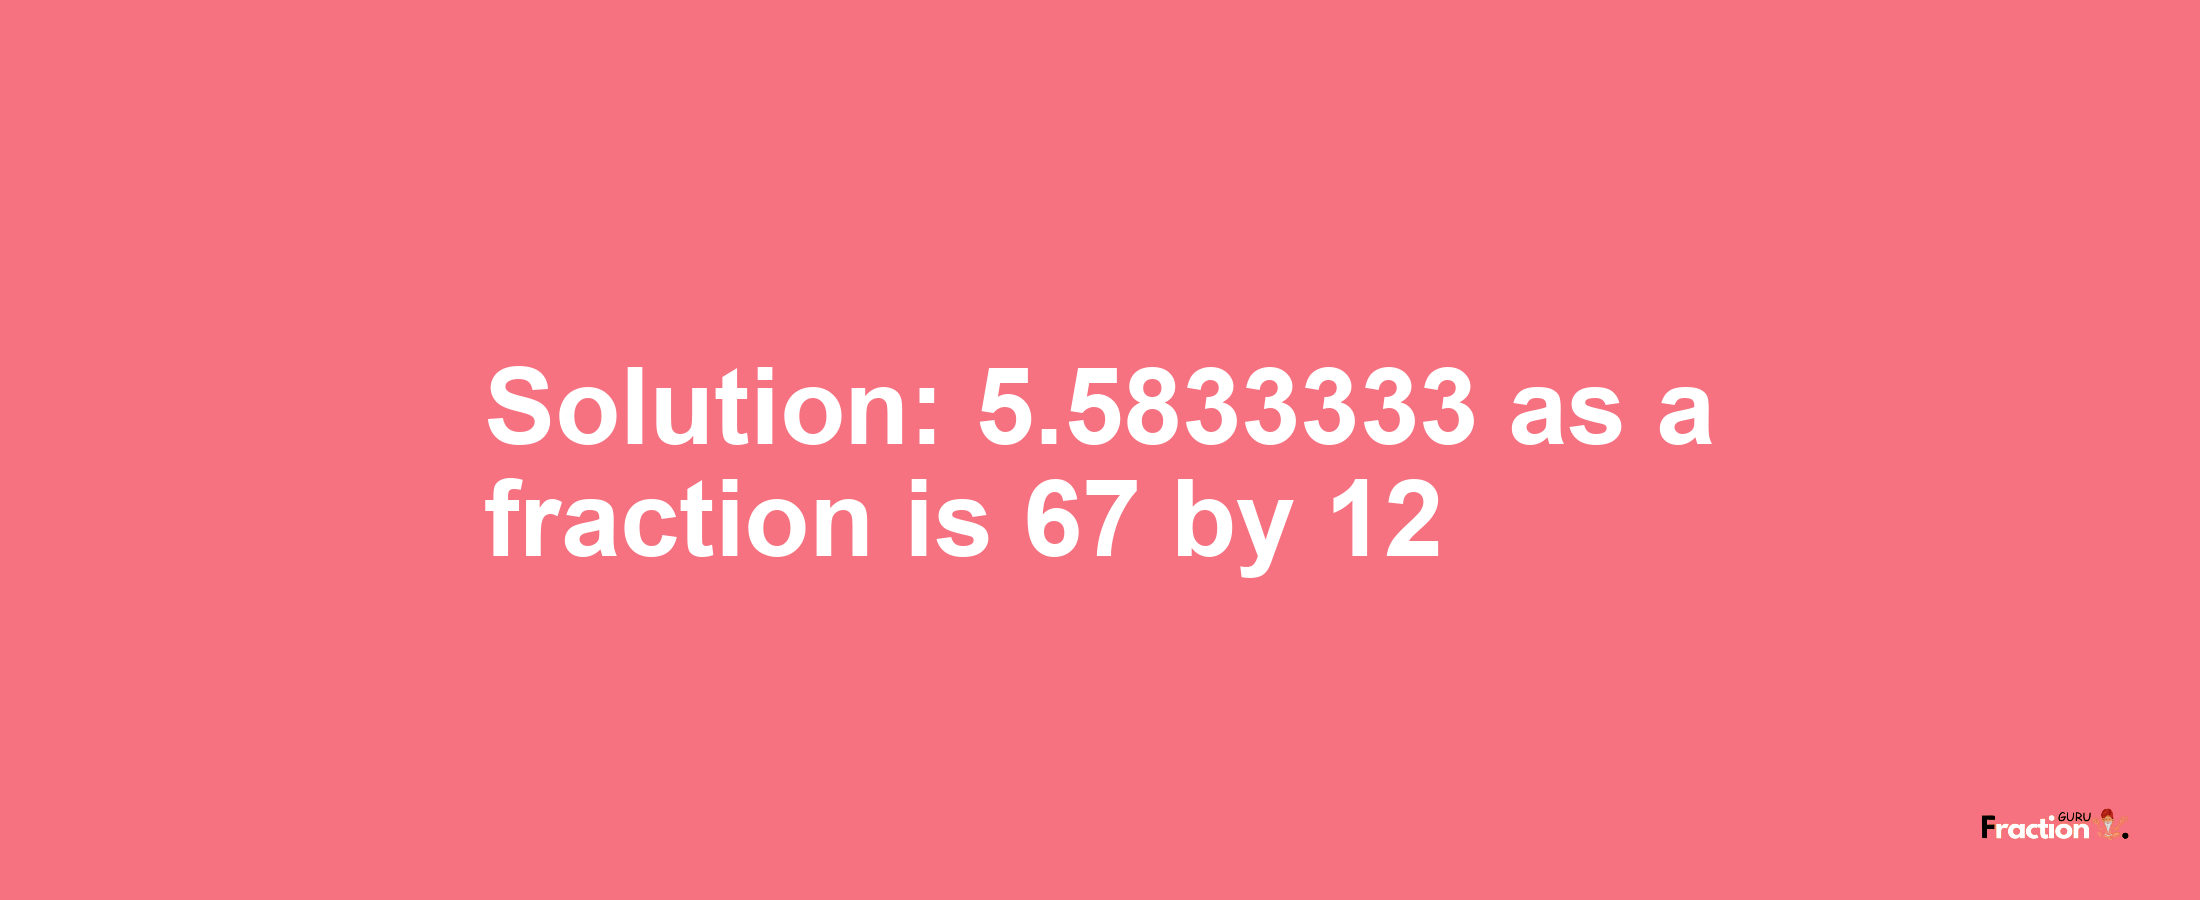 Solution:5.5833333 as a fraction is 67/12